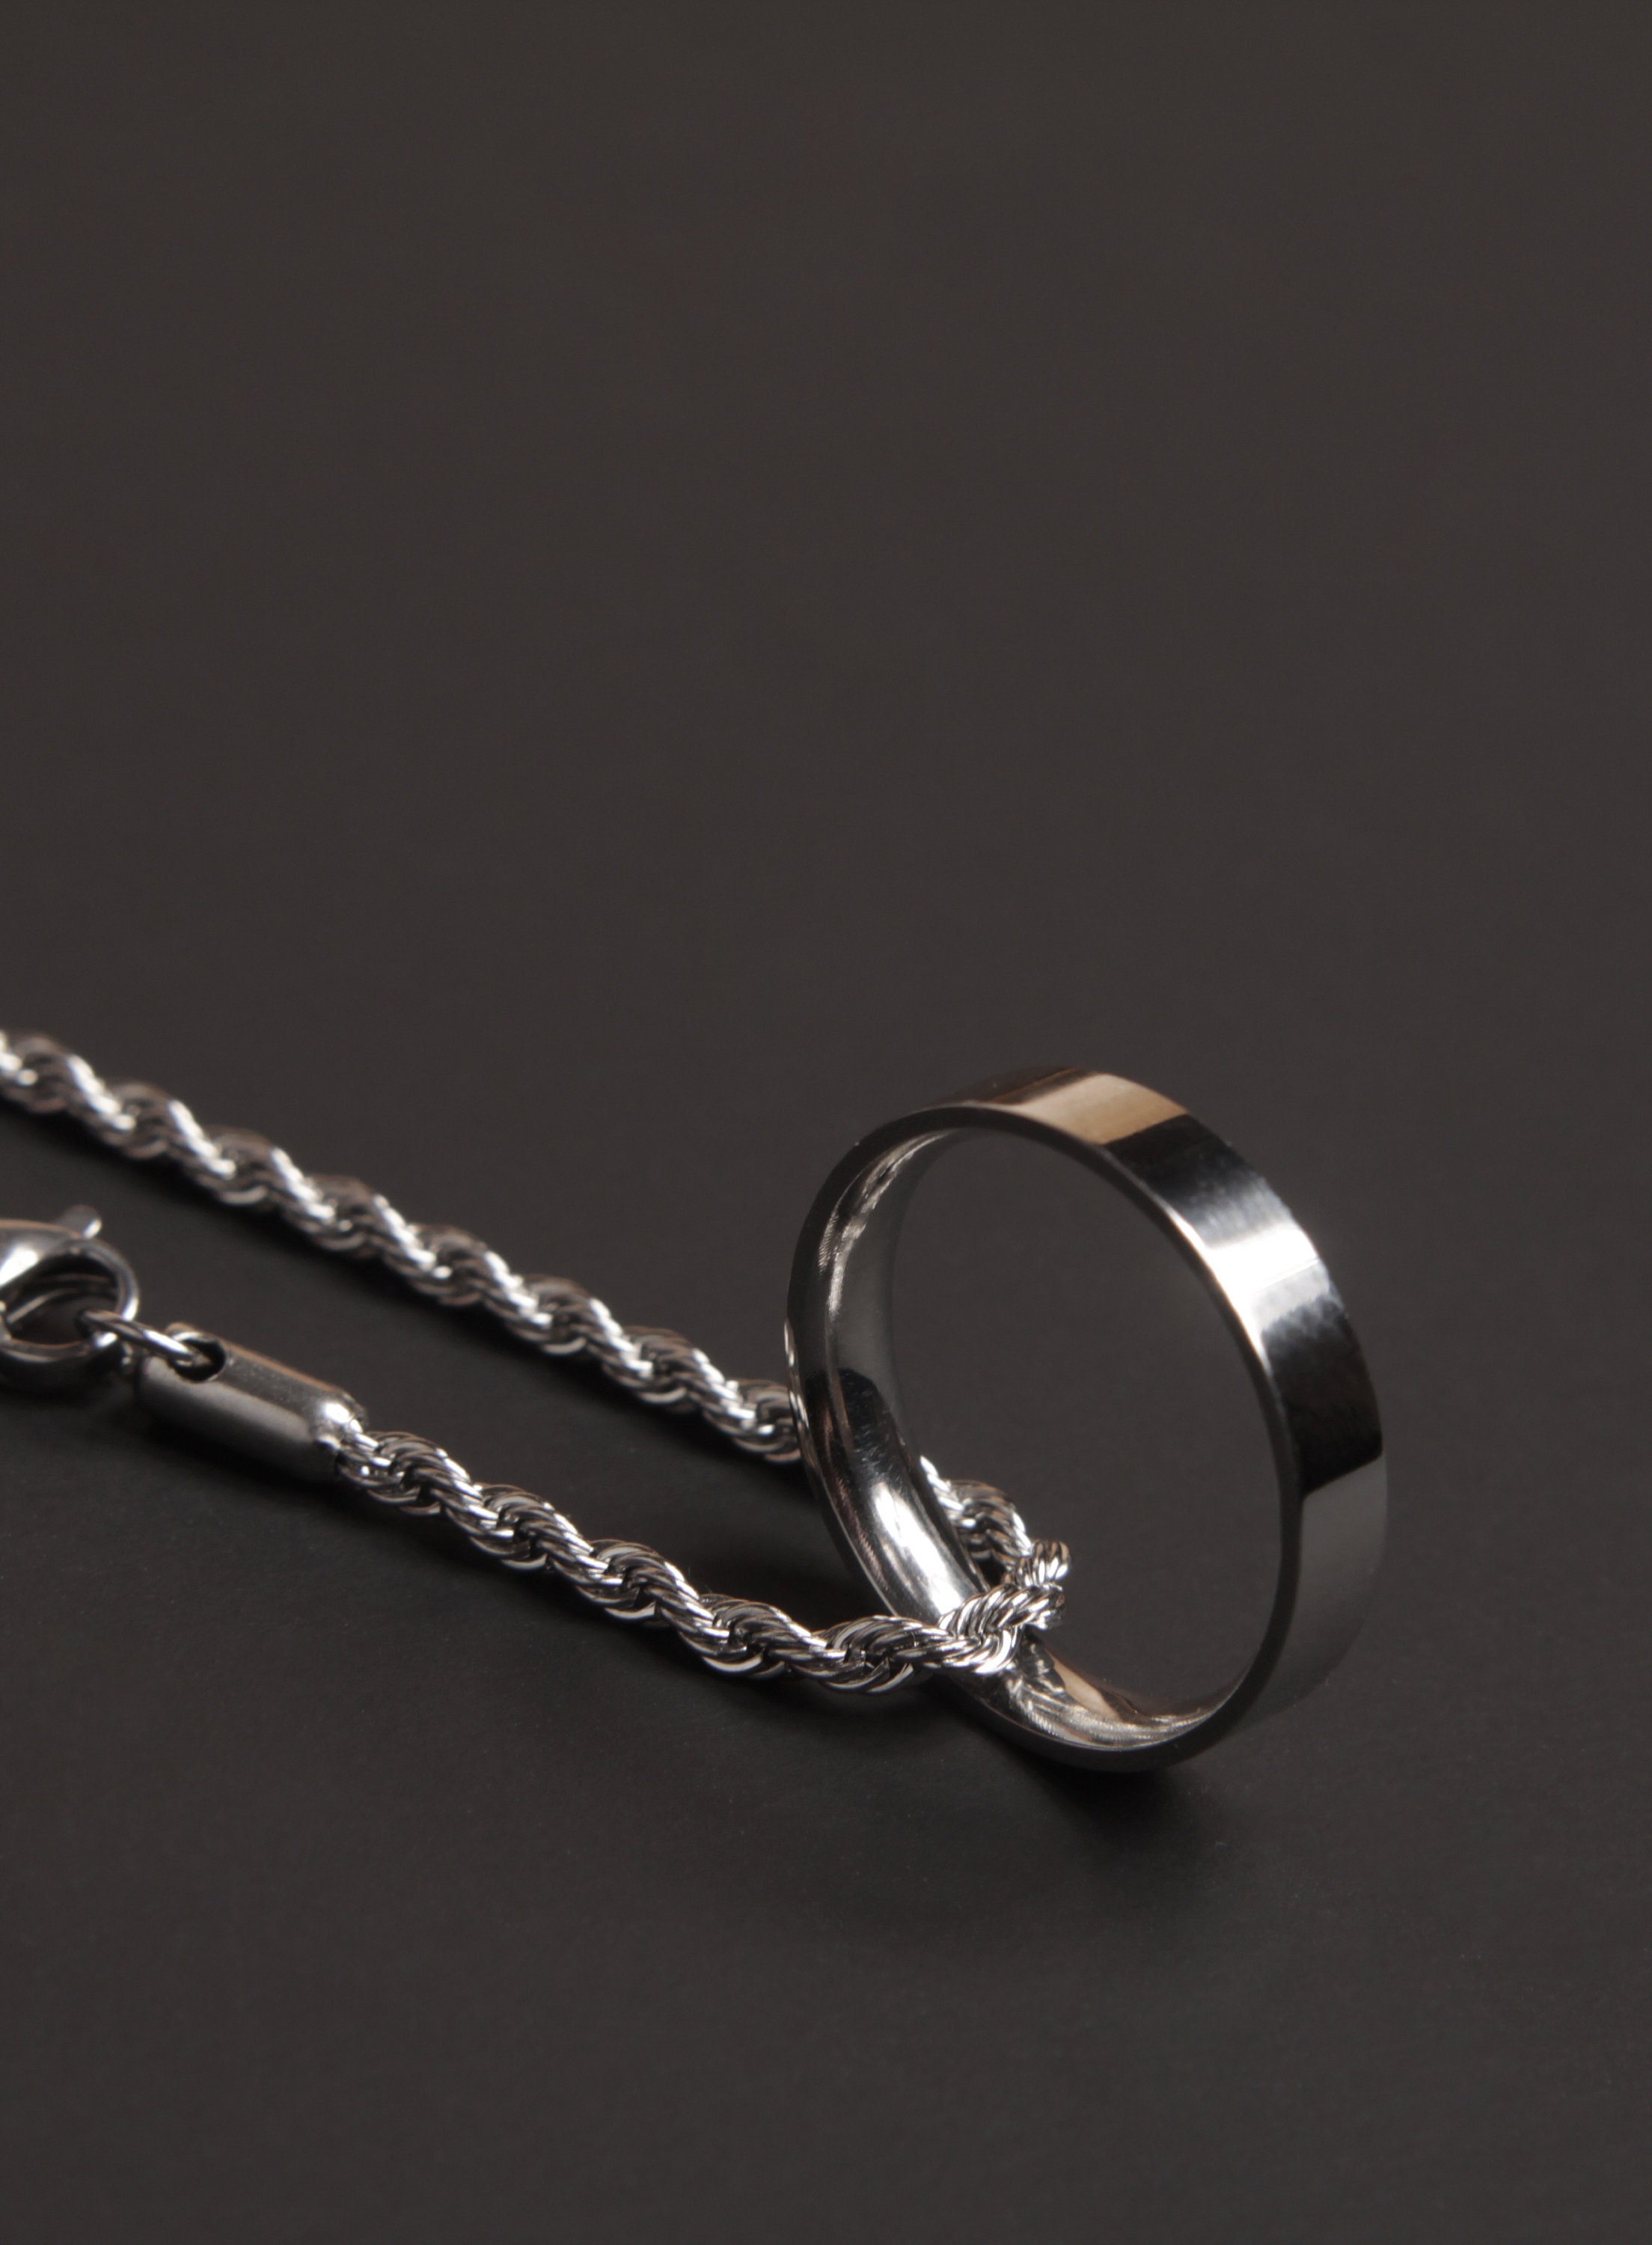 Waterproof Stainless Steel Ring Necklace for Men / Men's Ring Pendant Rope  Chain / Symbol of Commitment, Infinity, Forever and Karma. 